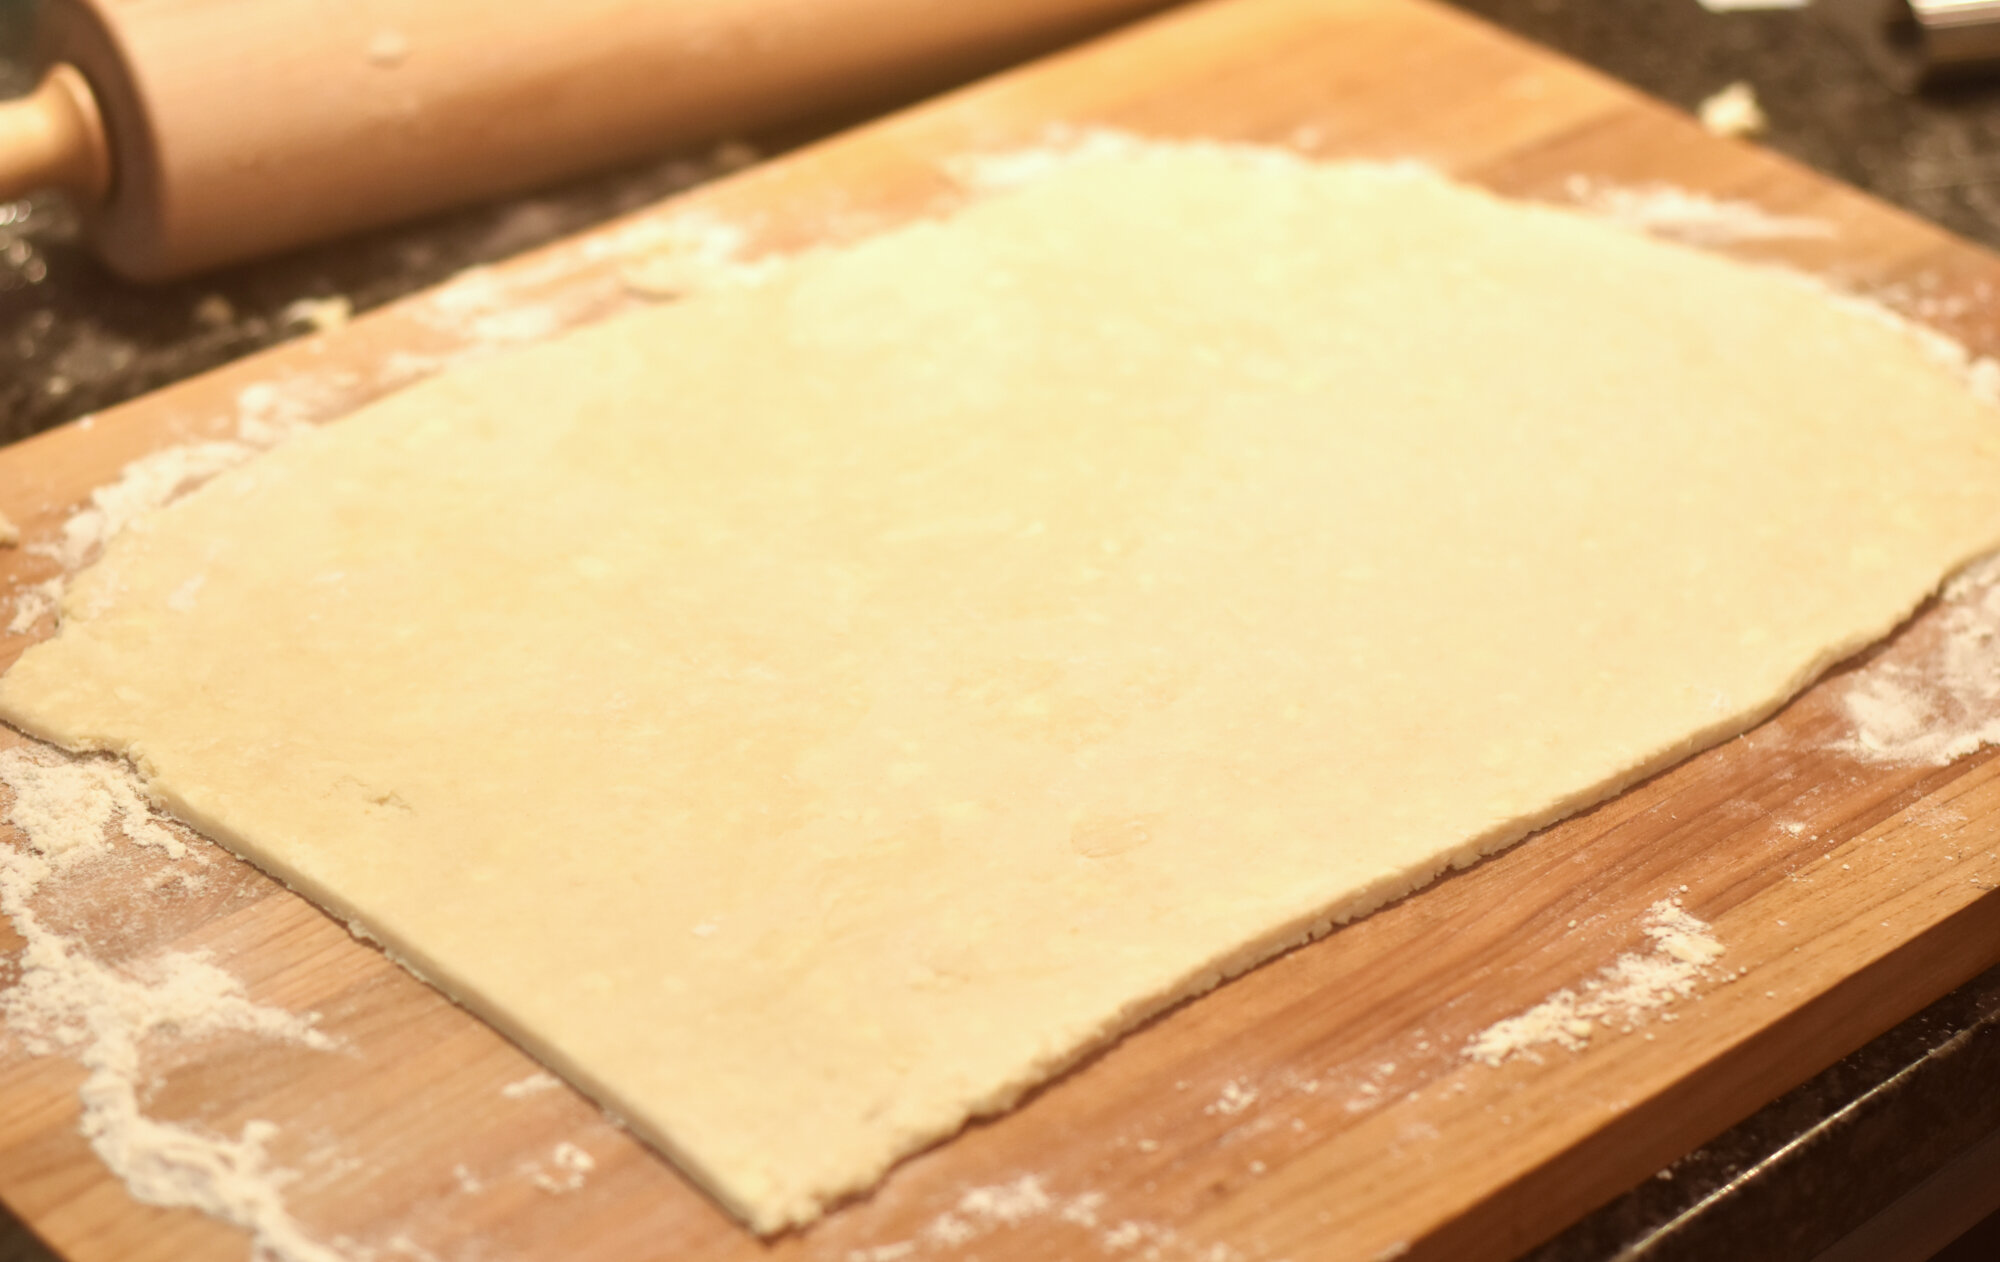 Hint of Southern_Rolled Out Dough_v01.jpg